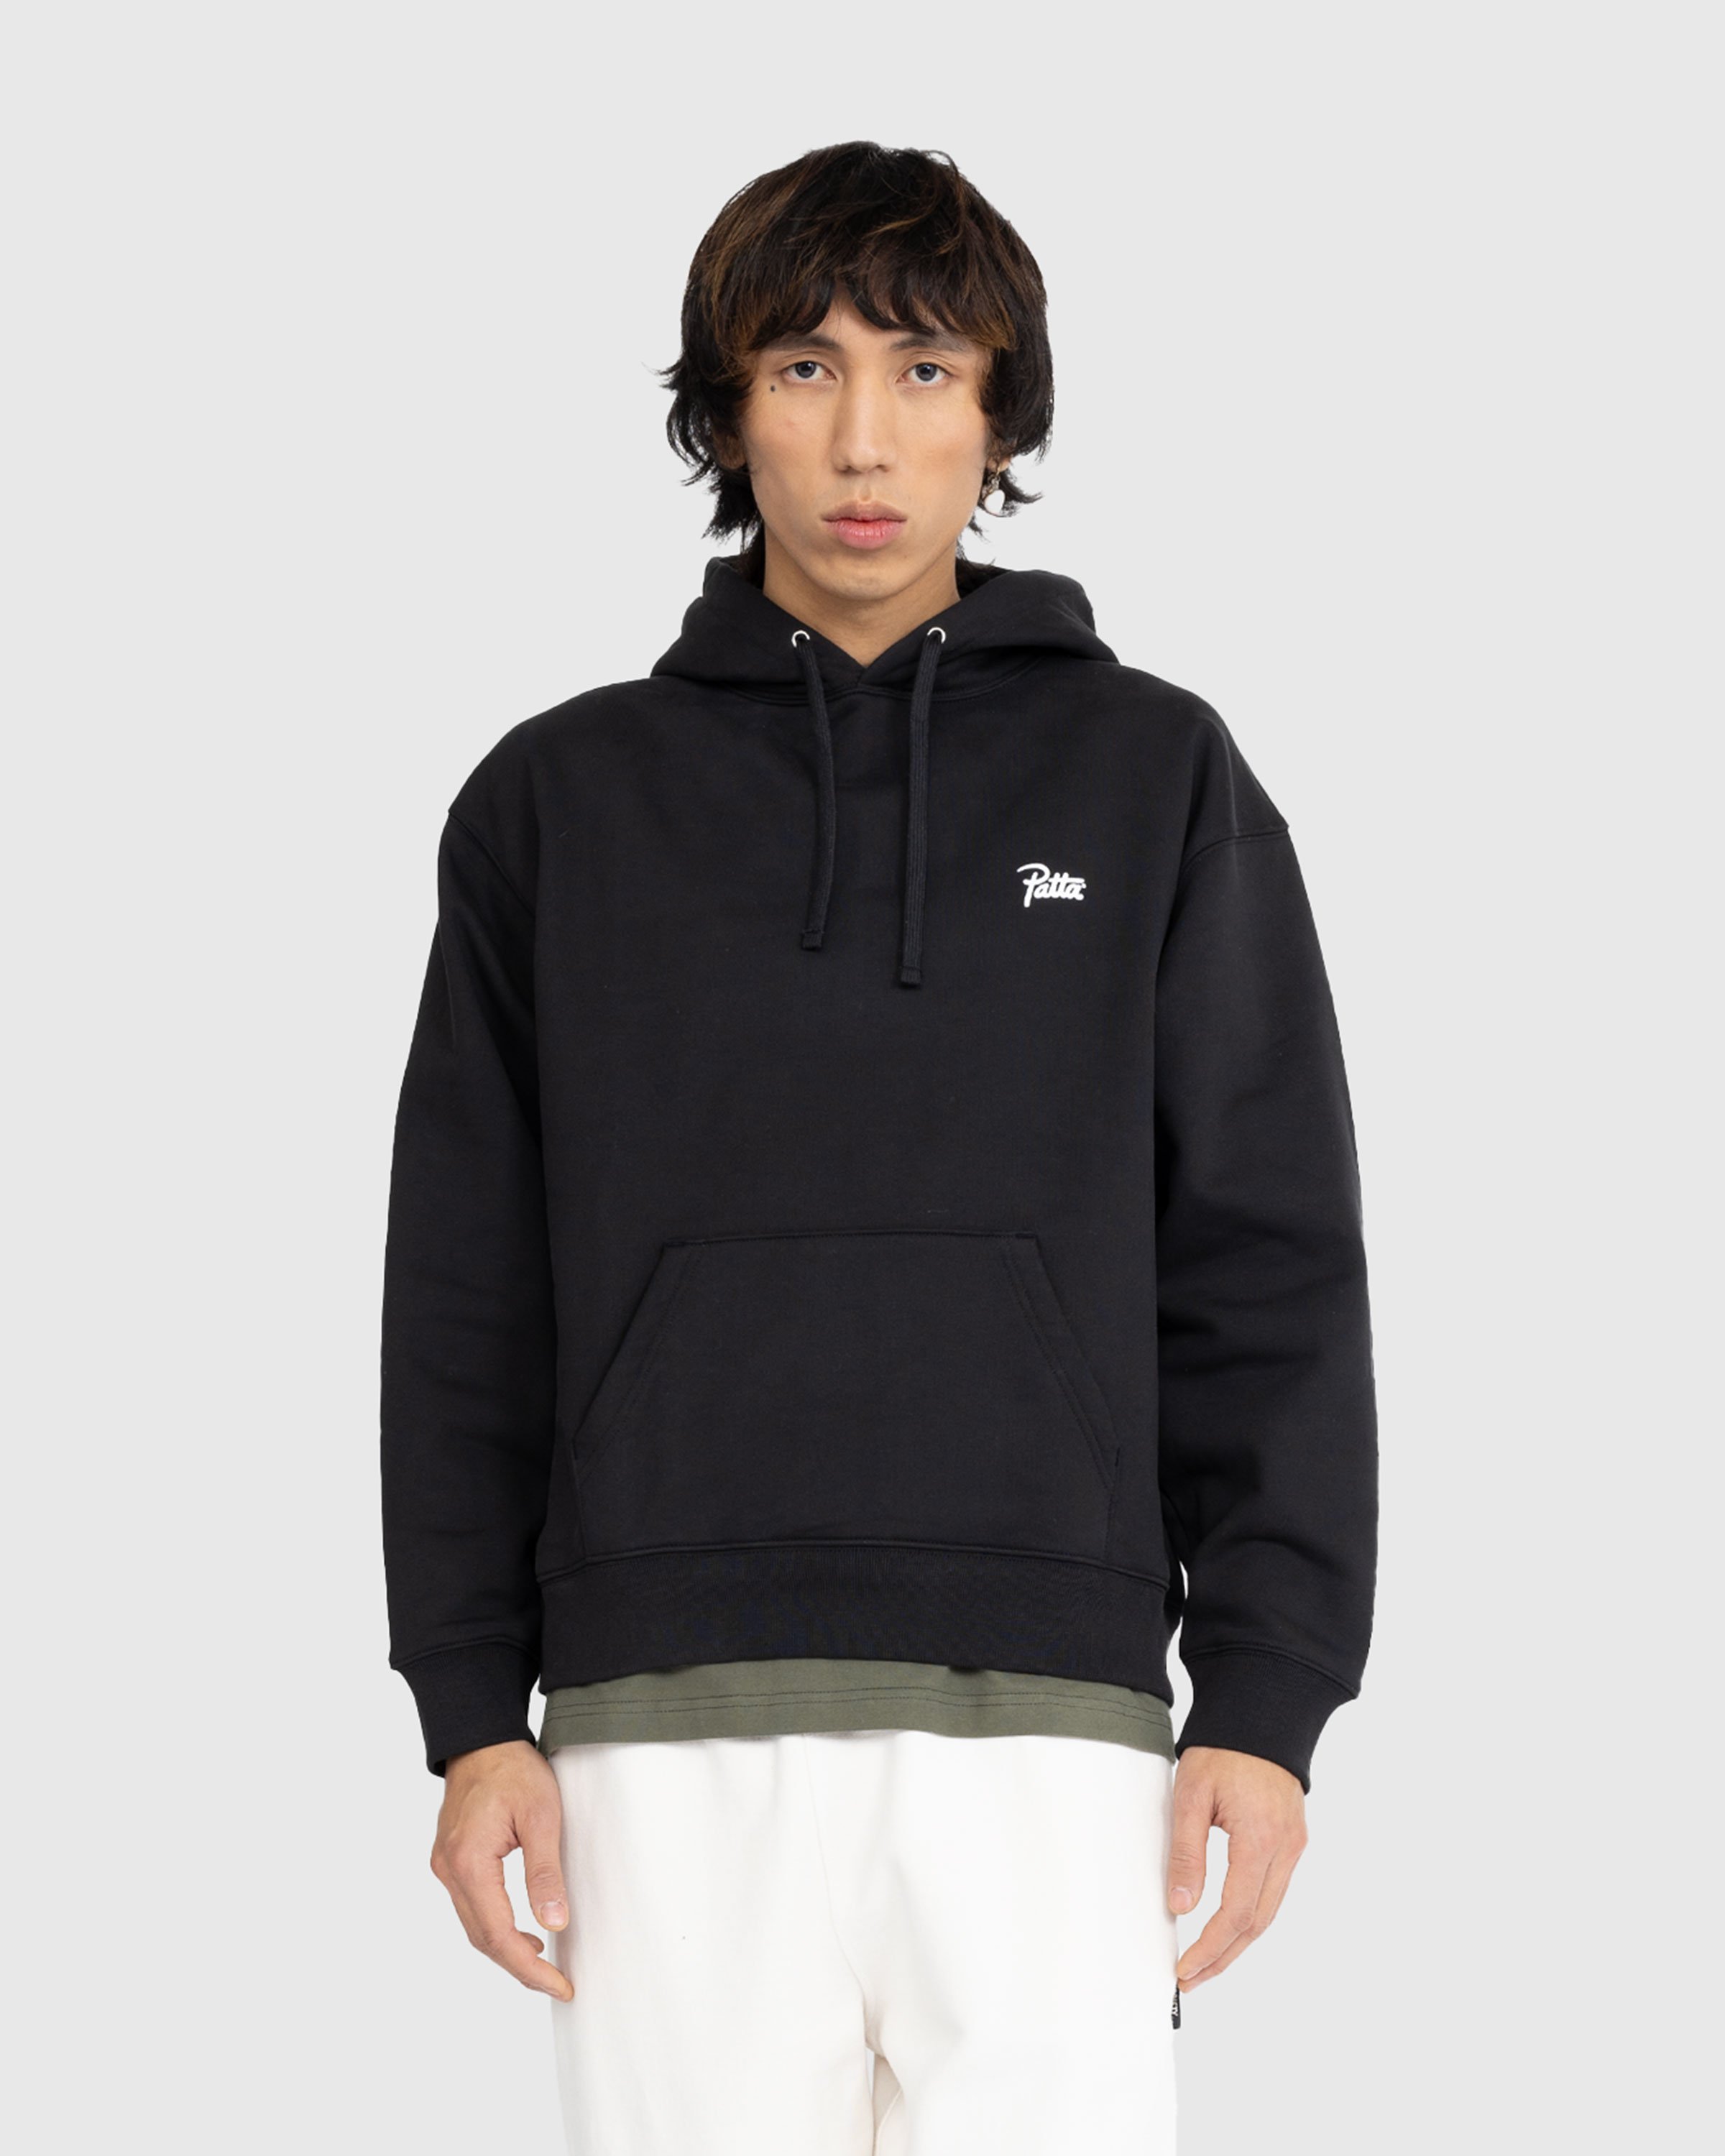 Patta - Forever and Always Boxy Hoodie Black - Clothing - Black - Image 2